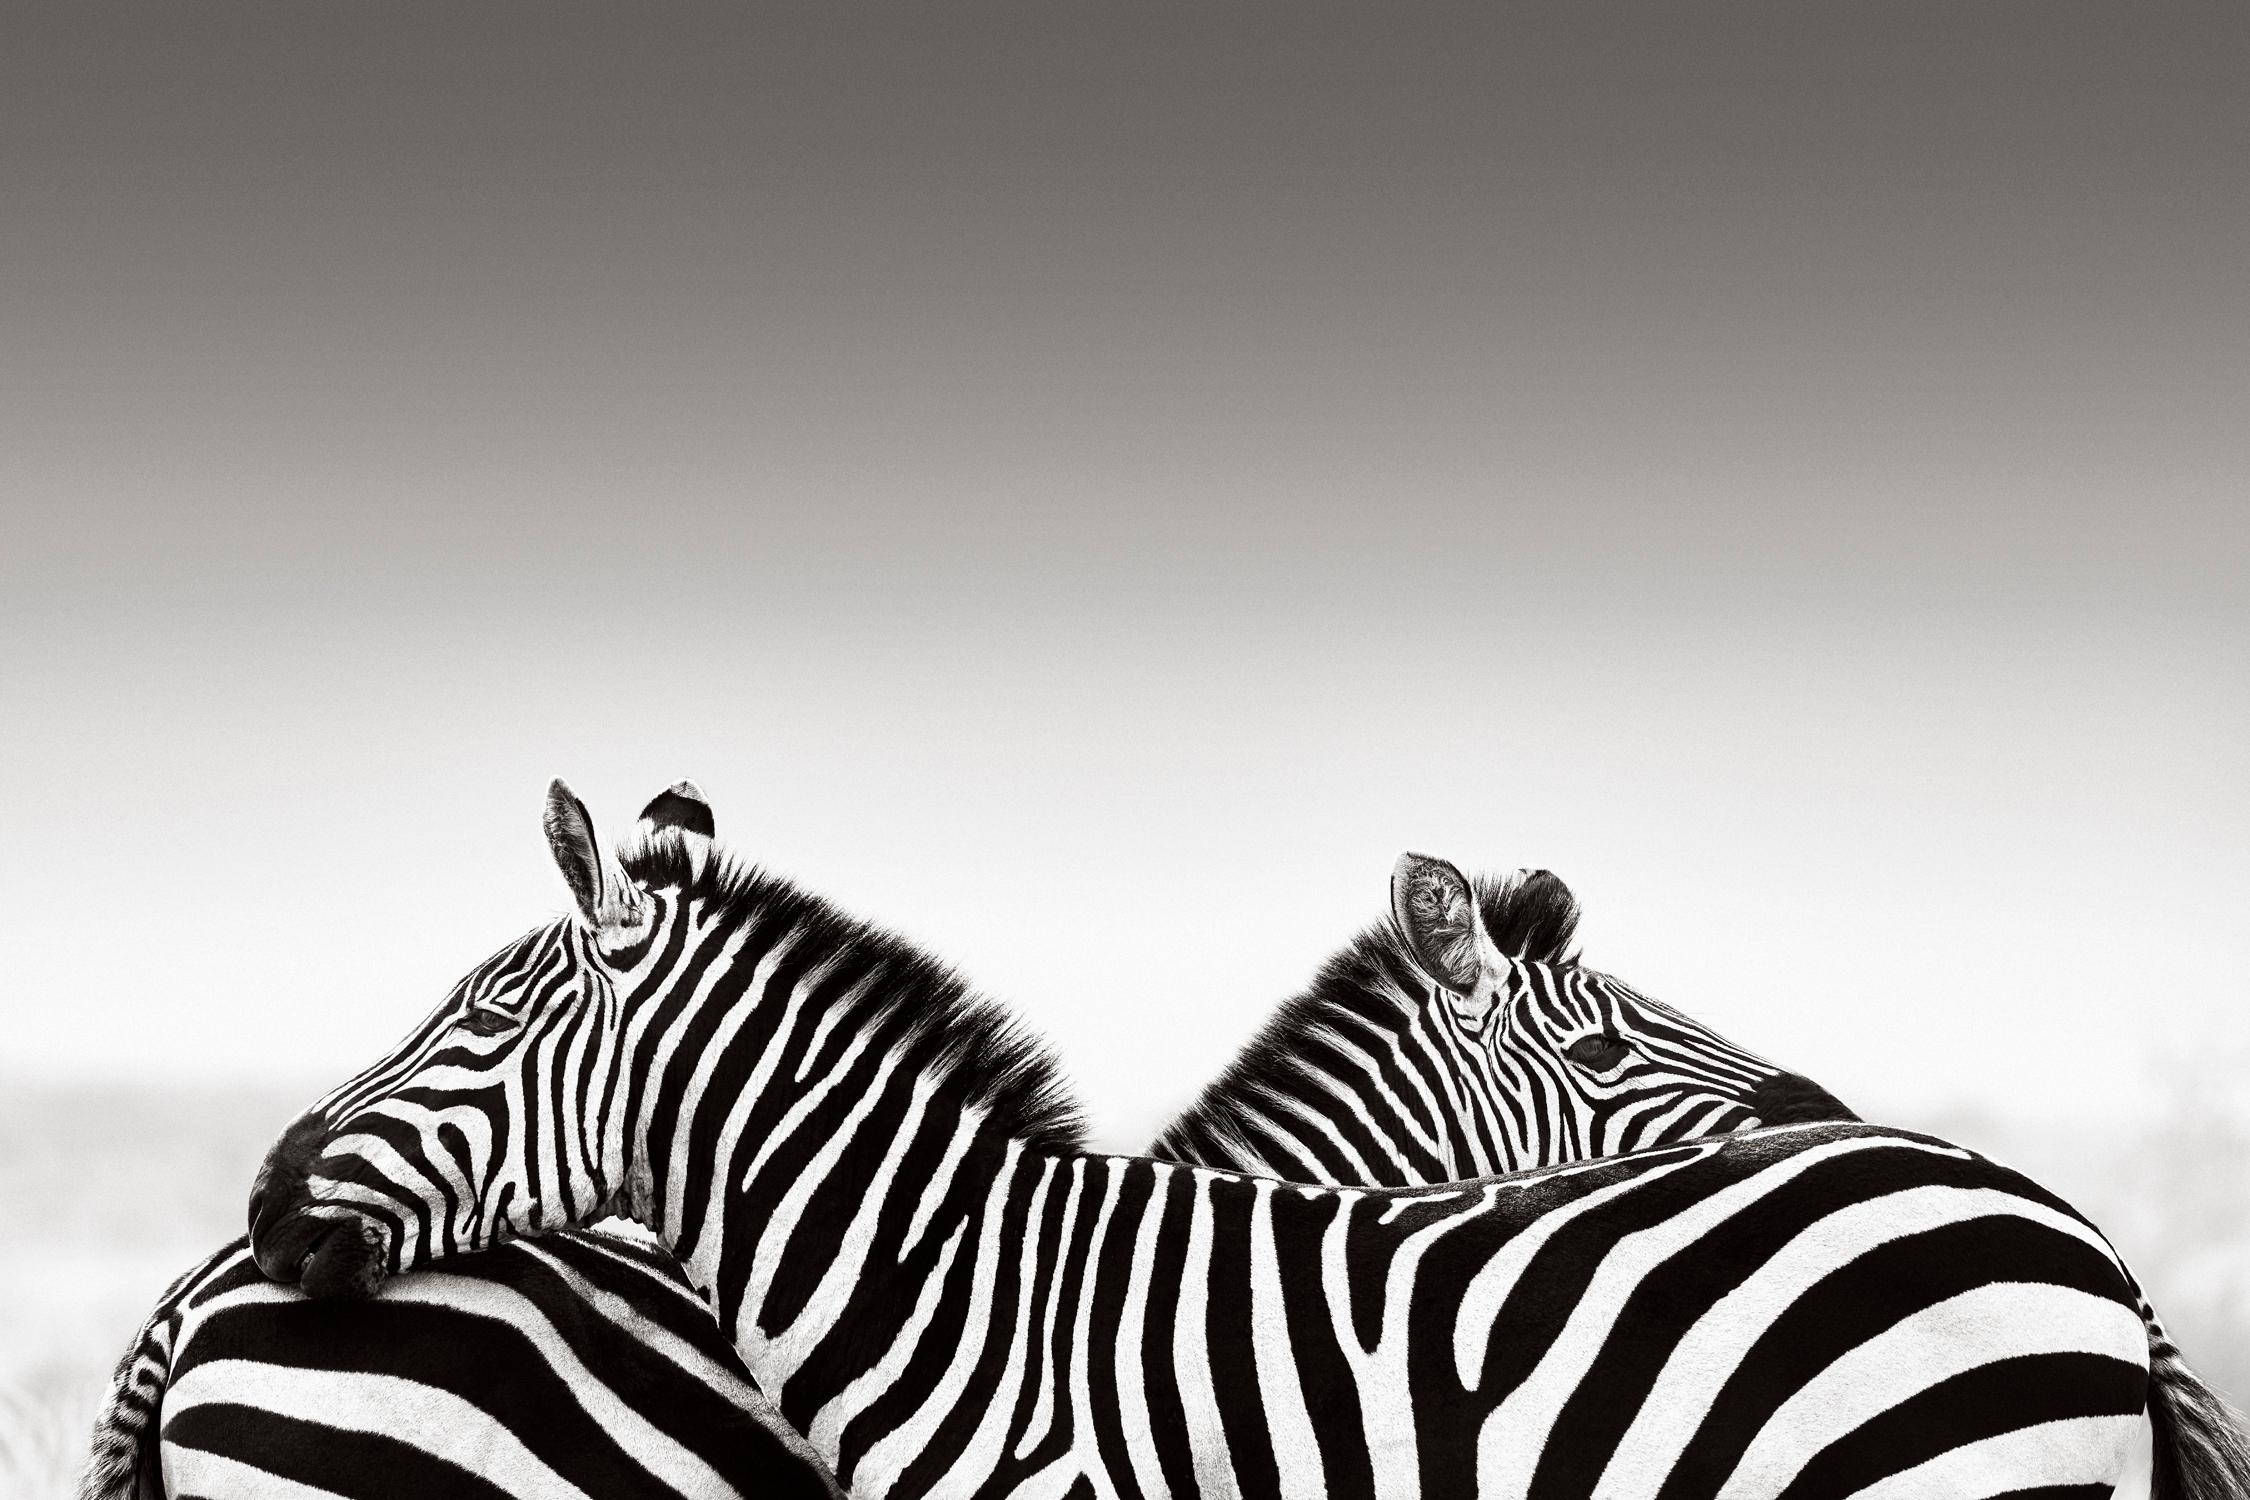 Drew Doggett Black and White Photograph - Two Zebras Against a Minimal Backdrop, Design-Inspired